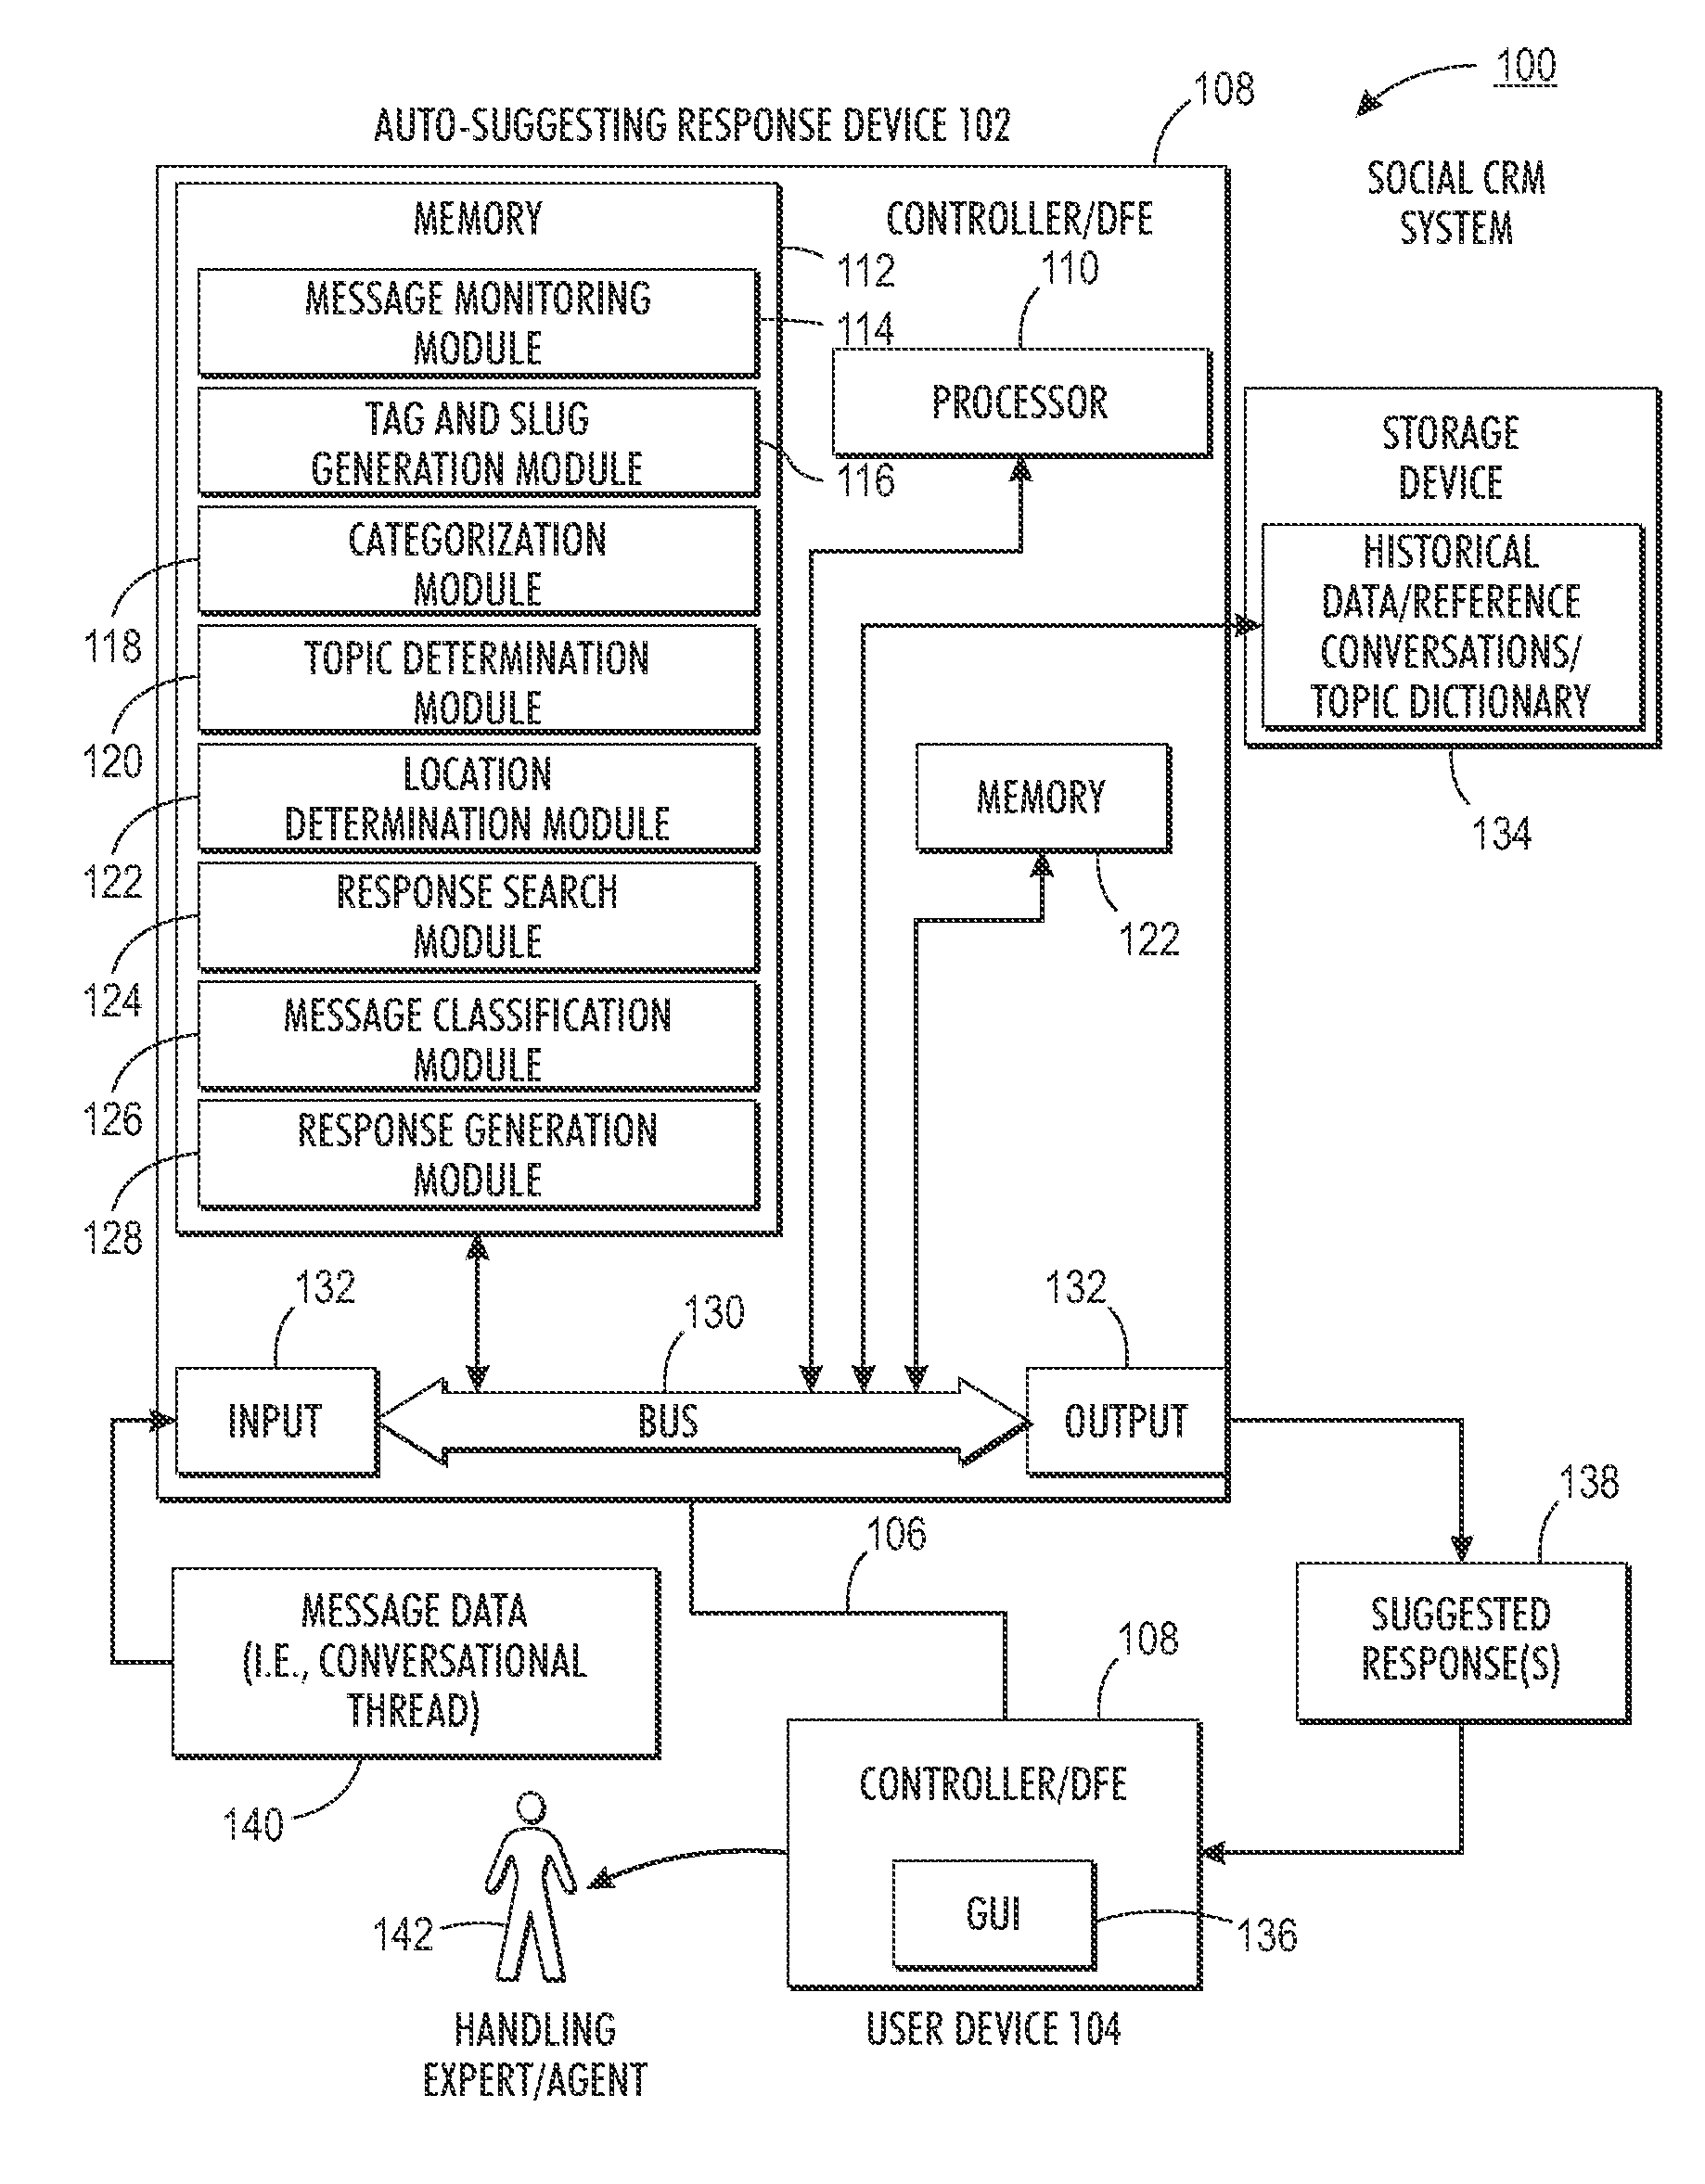 System and method for auto-suggesting responses based on social conversational contents in customer care services